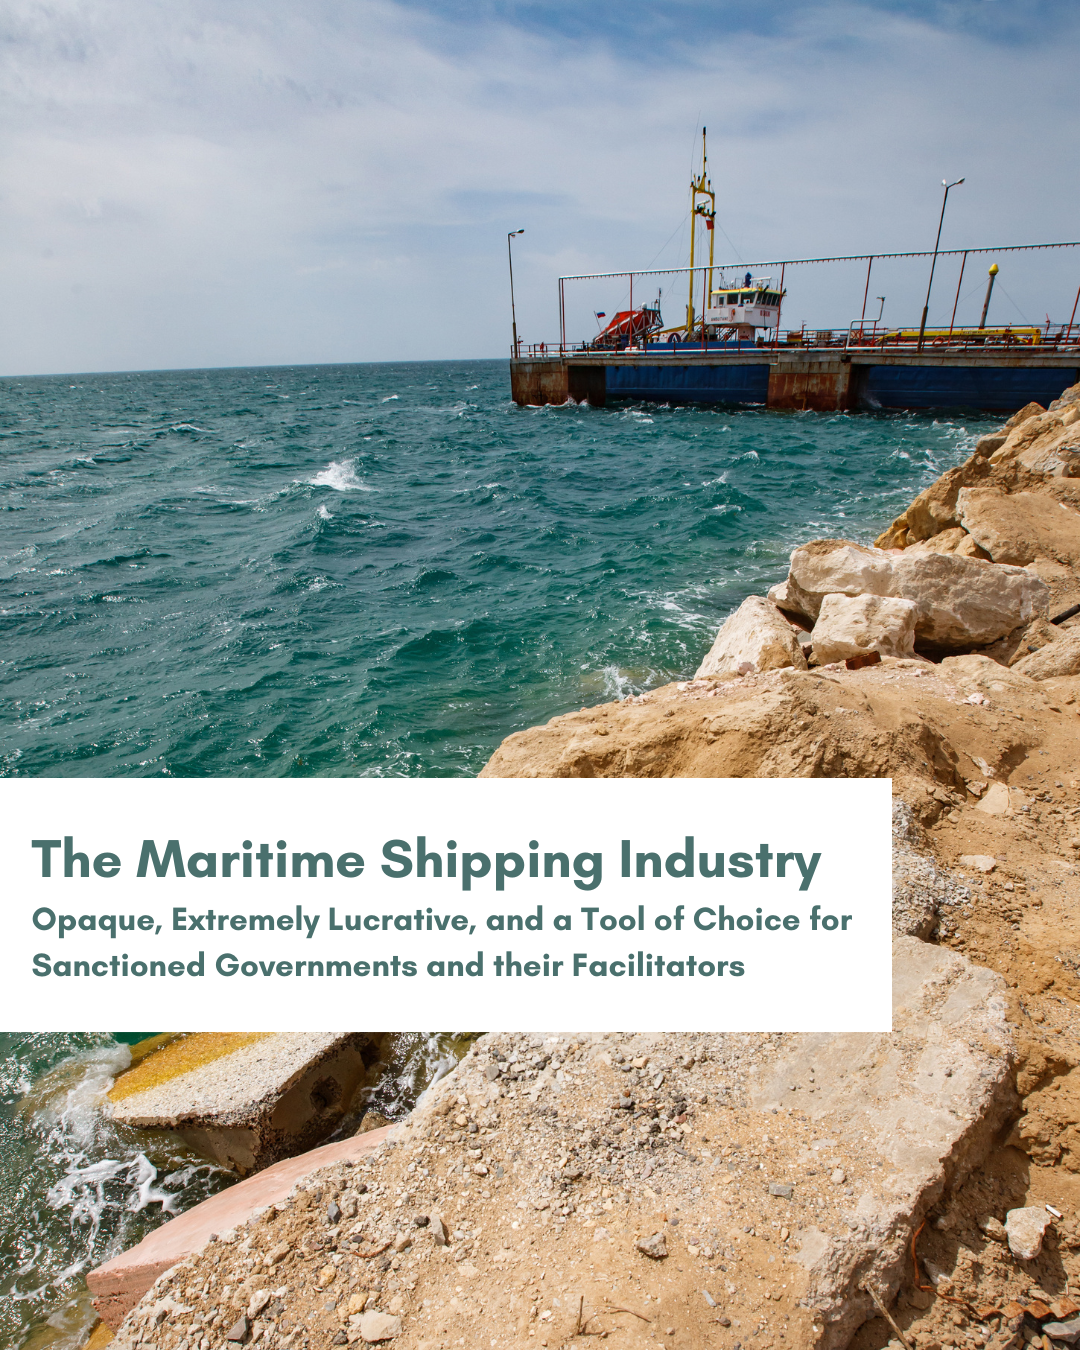 The Maritime Shipping Industry